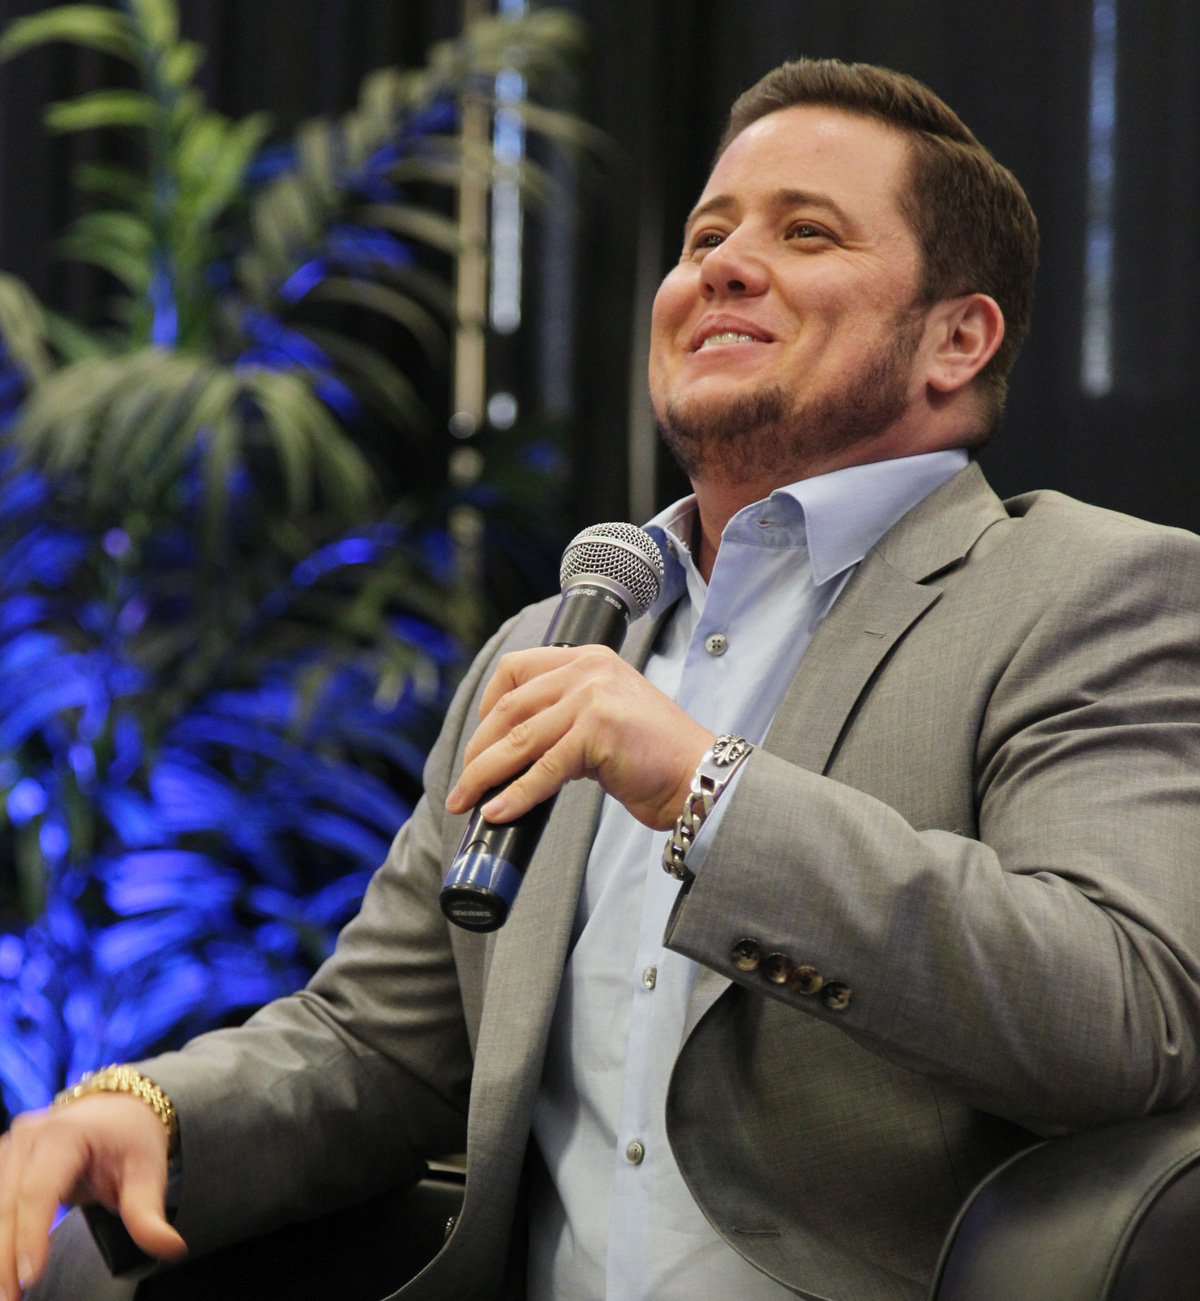 Chaz Bono speaks to students, staff and faculty in the Santos Manuel Student Union, May 14, 2013.